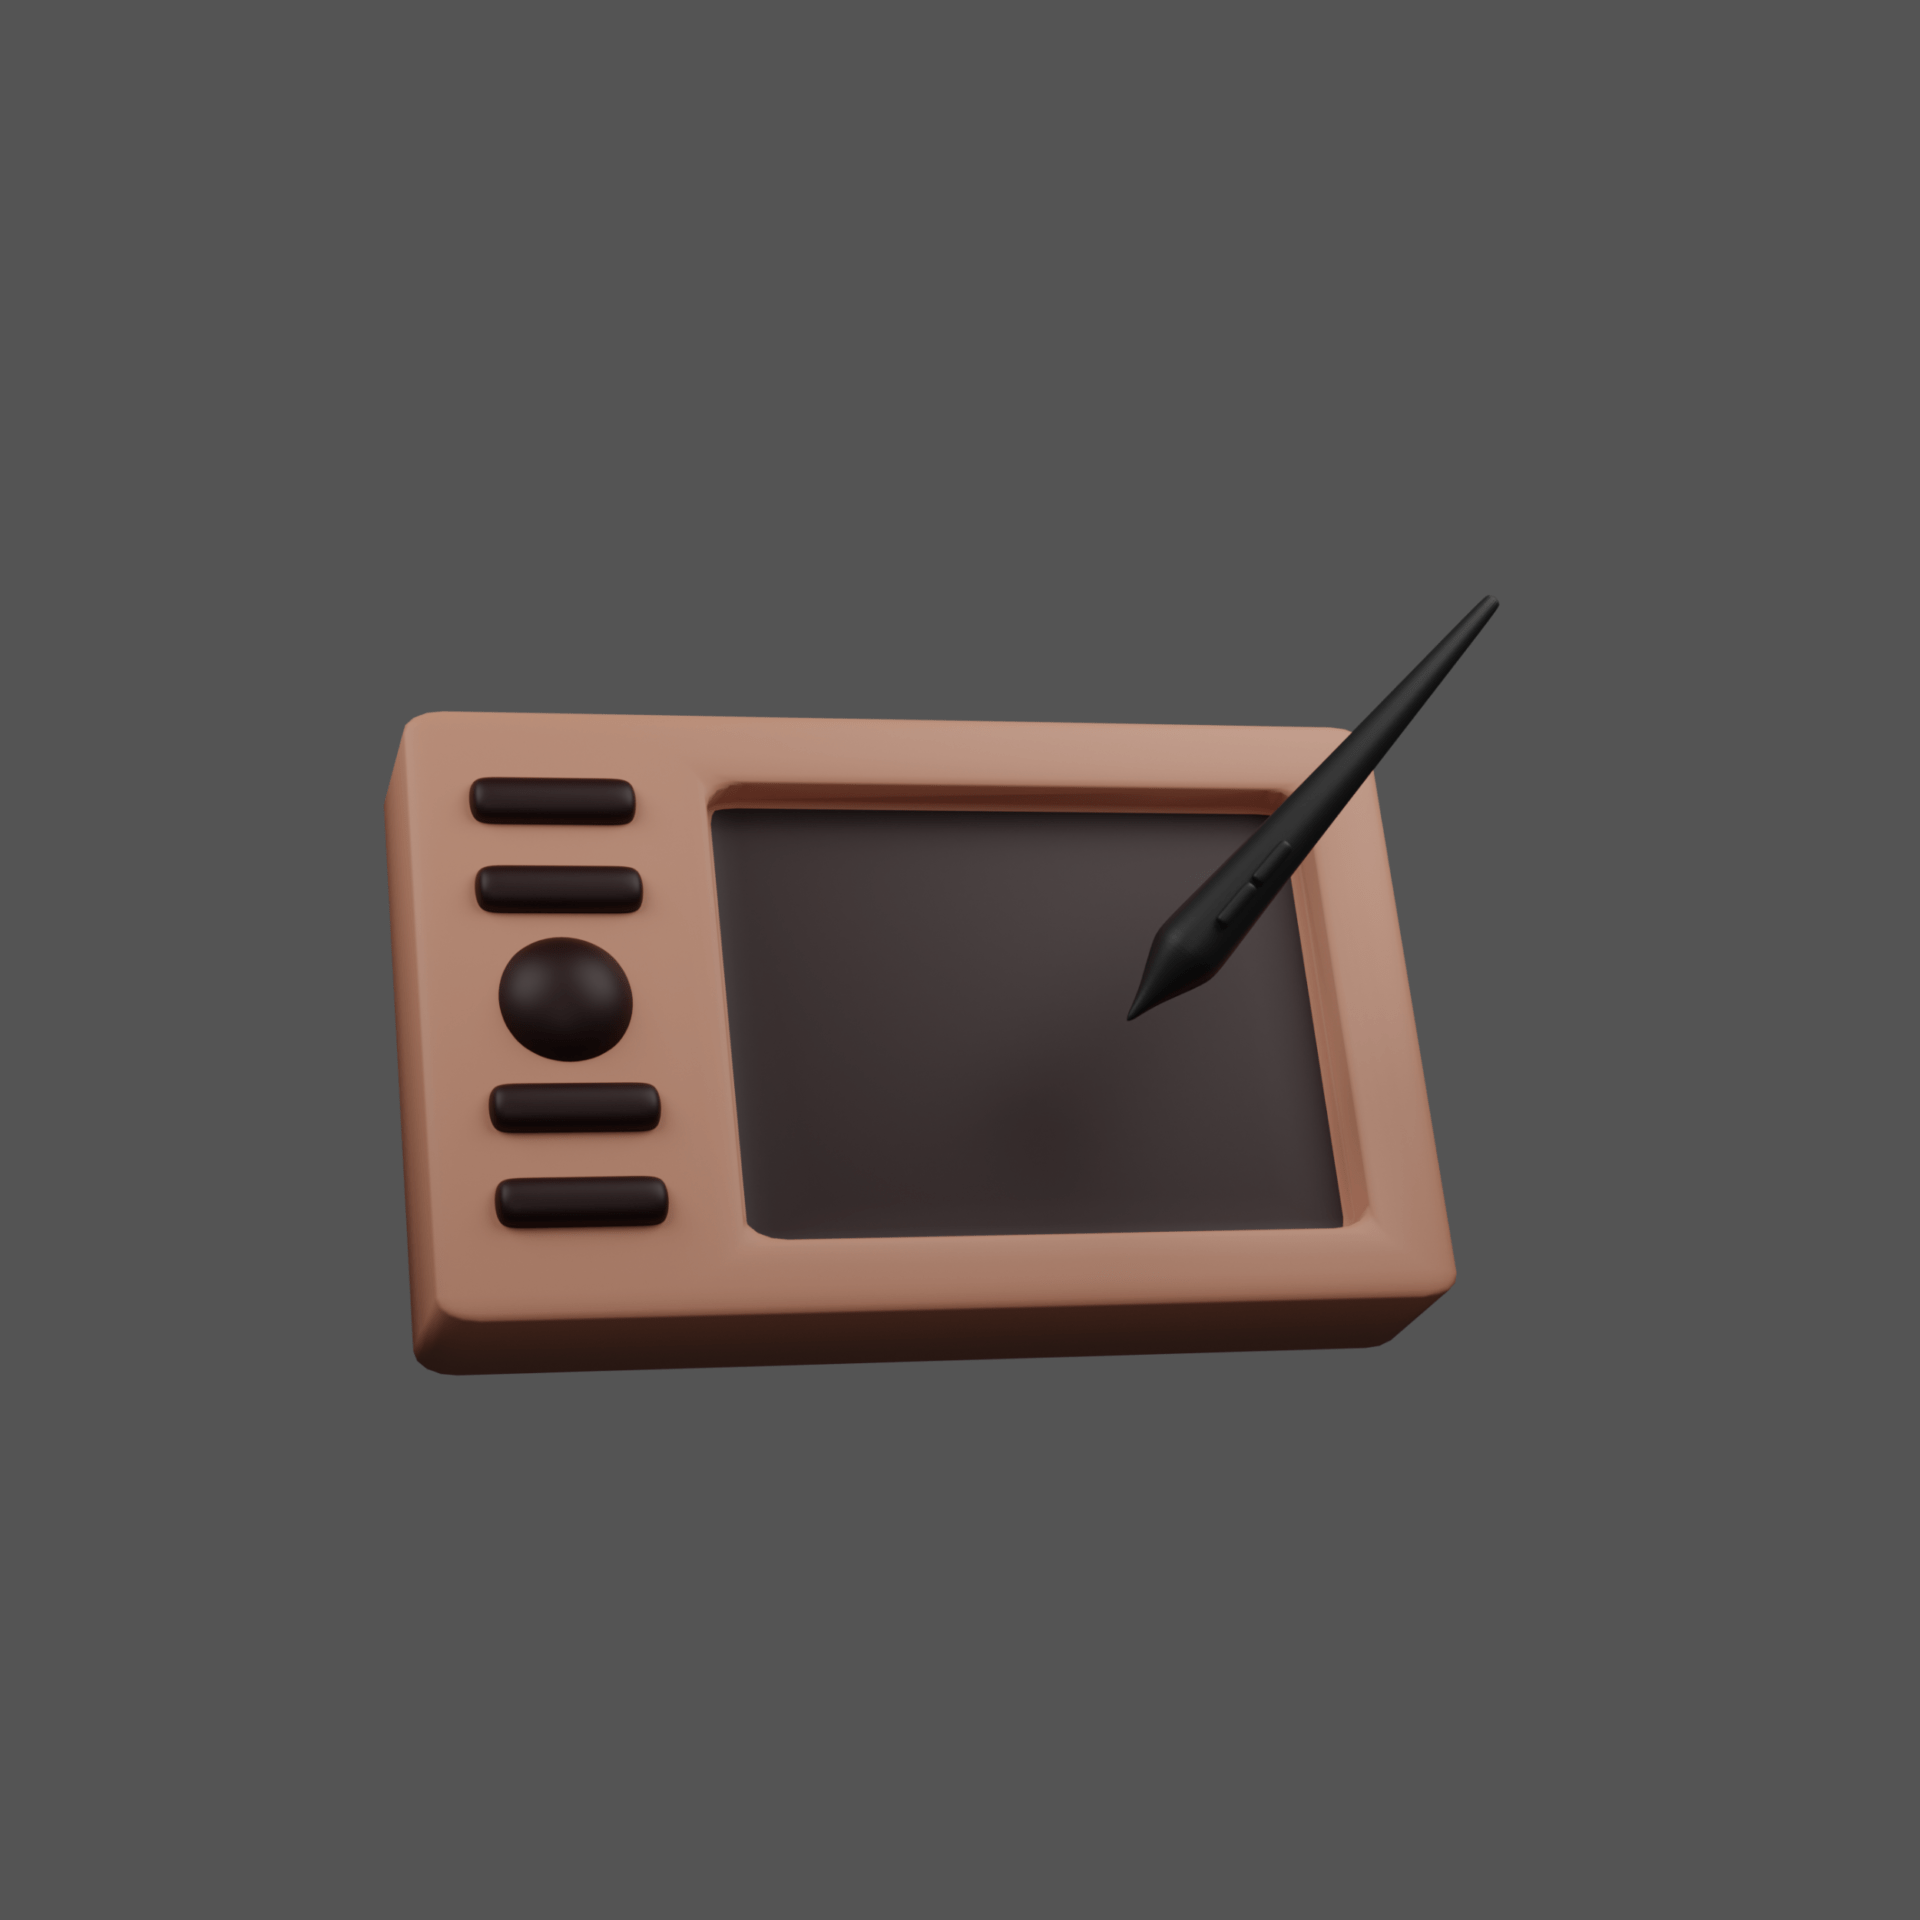 graphics-tablet